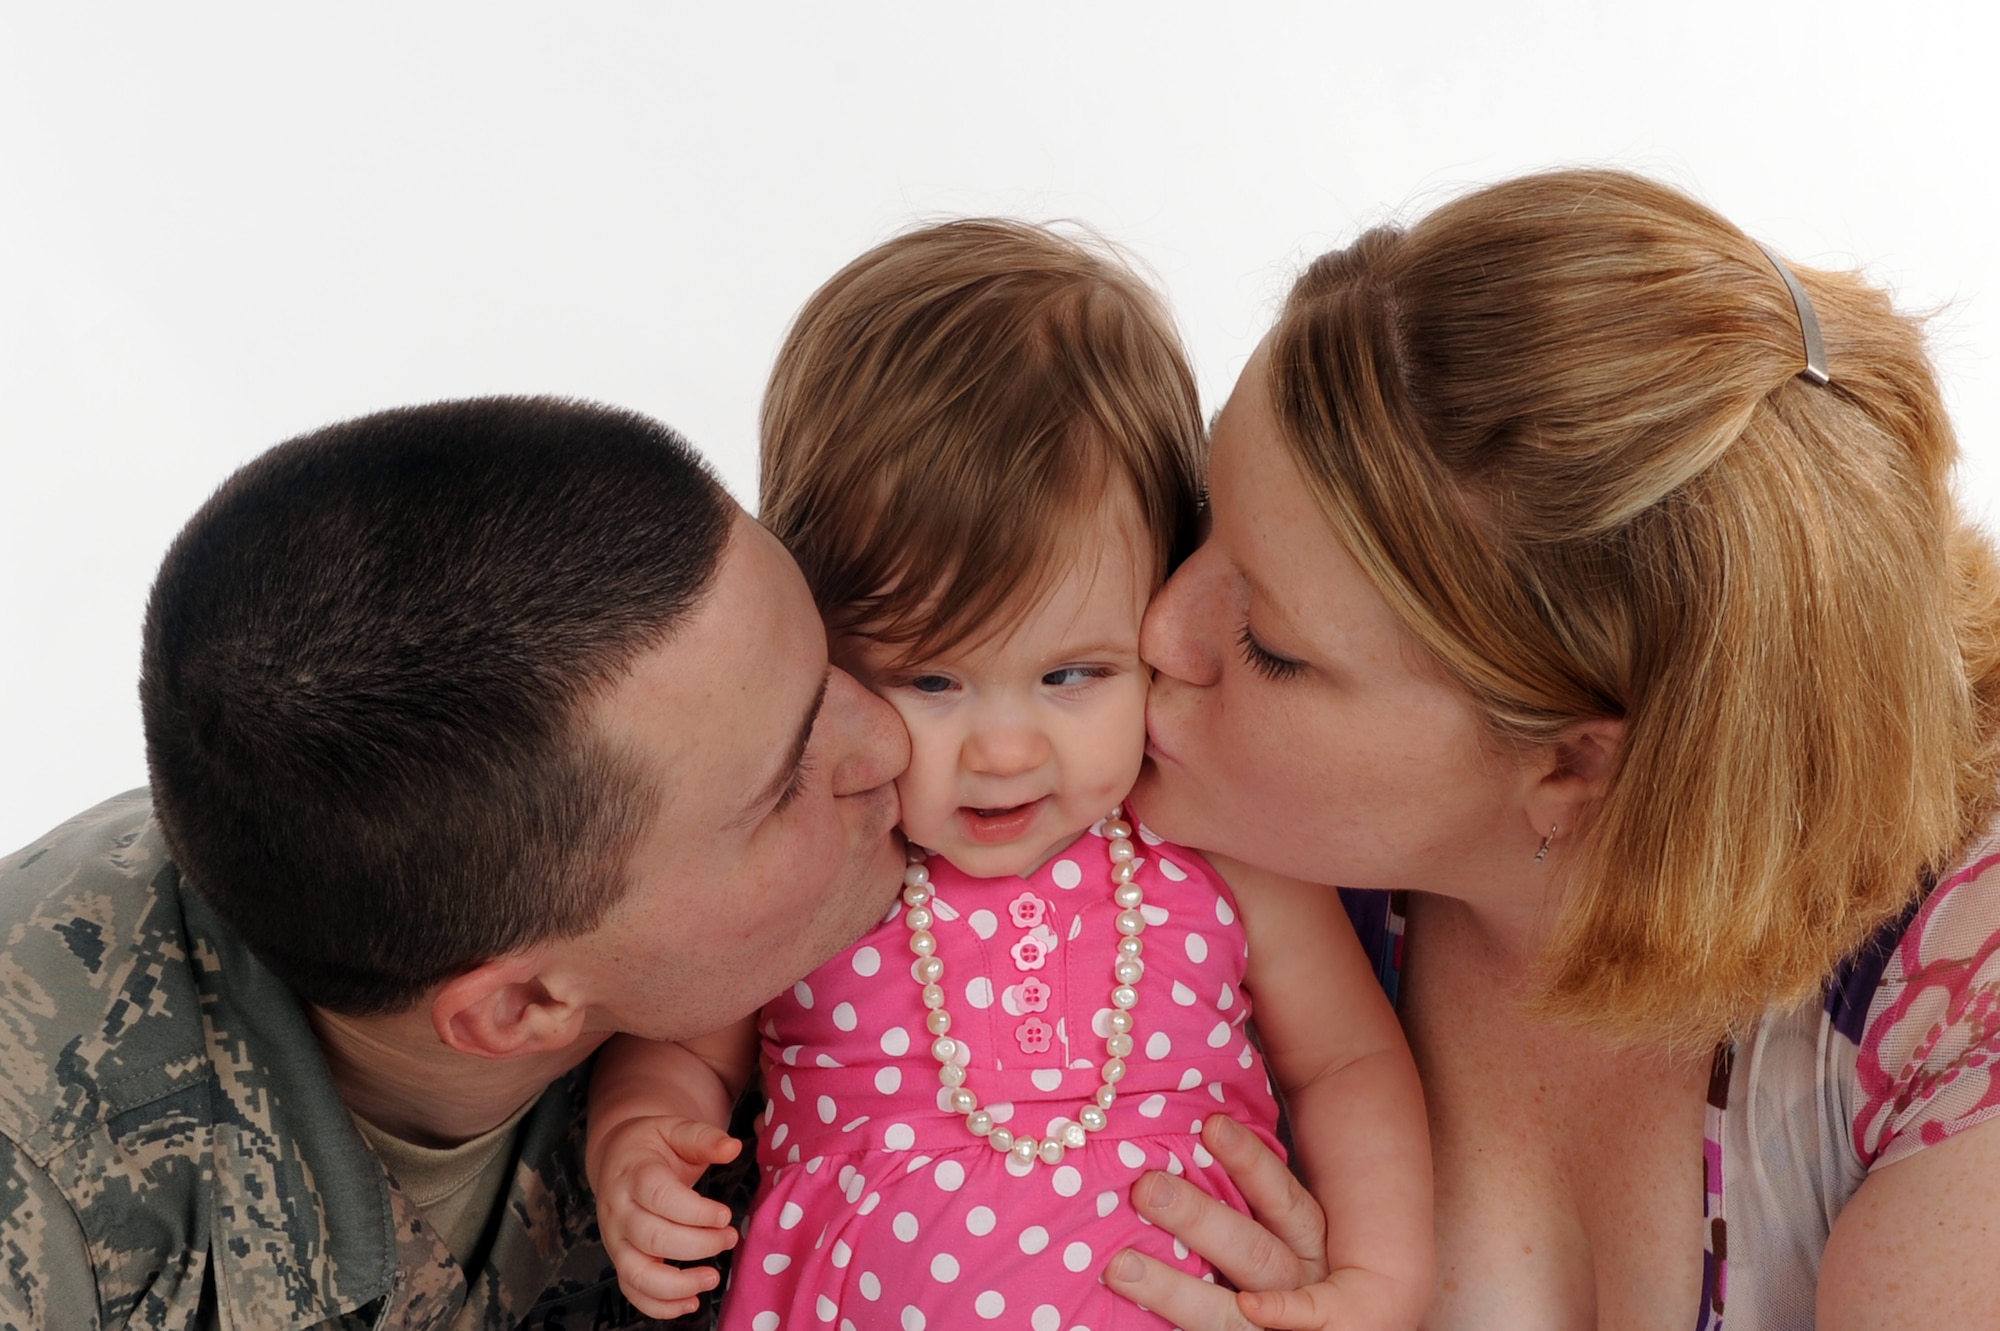 Senior Airman Derek Goodwin, 2d Maintenance Squadron, and his wife Stormy kiss their daughter Skyler. Skyler is blind with light perception due to Septo-optic Dysplasia. SOD can cause deficiencies in the pituitary, in addition to her blindness Skyler has to have injections and take pills for growth and hormone development. (U.S. Air Force photo by Senior Airman Joanna M. Kresge)